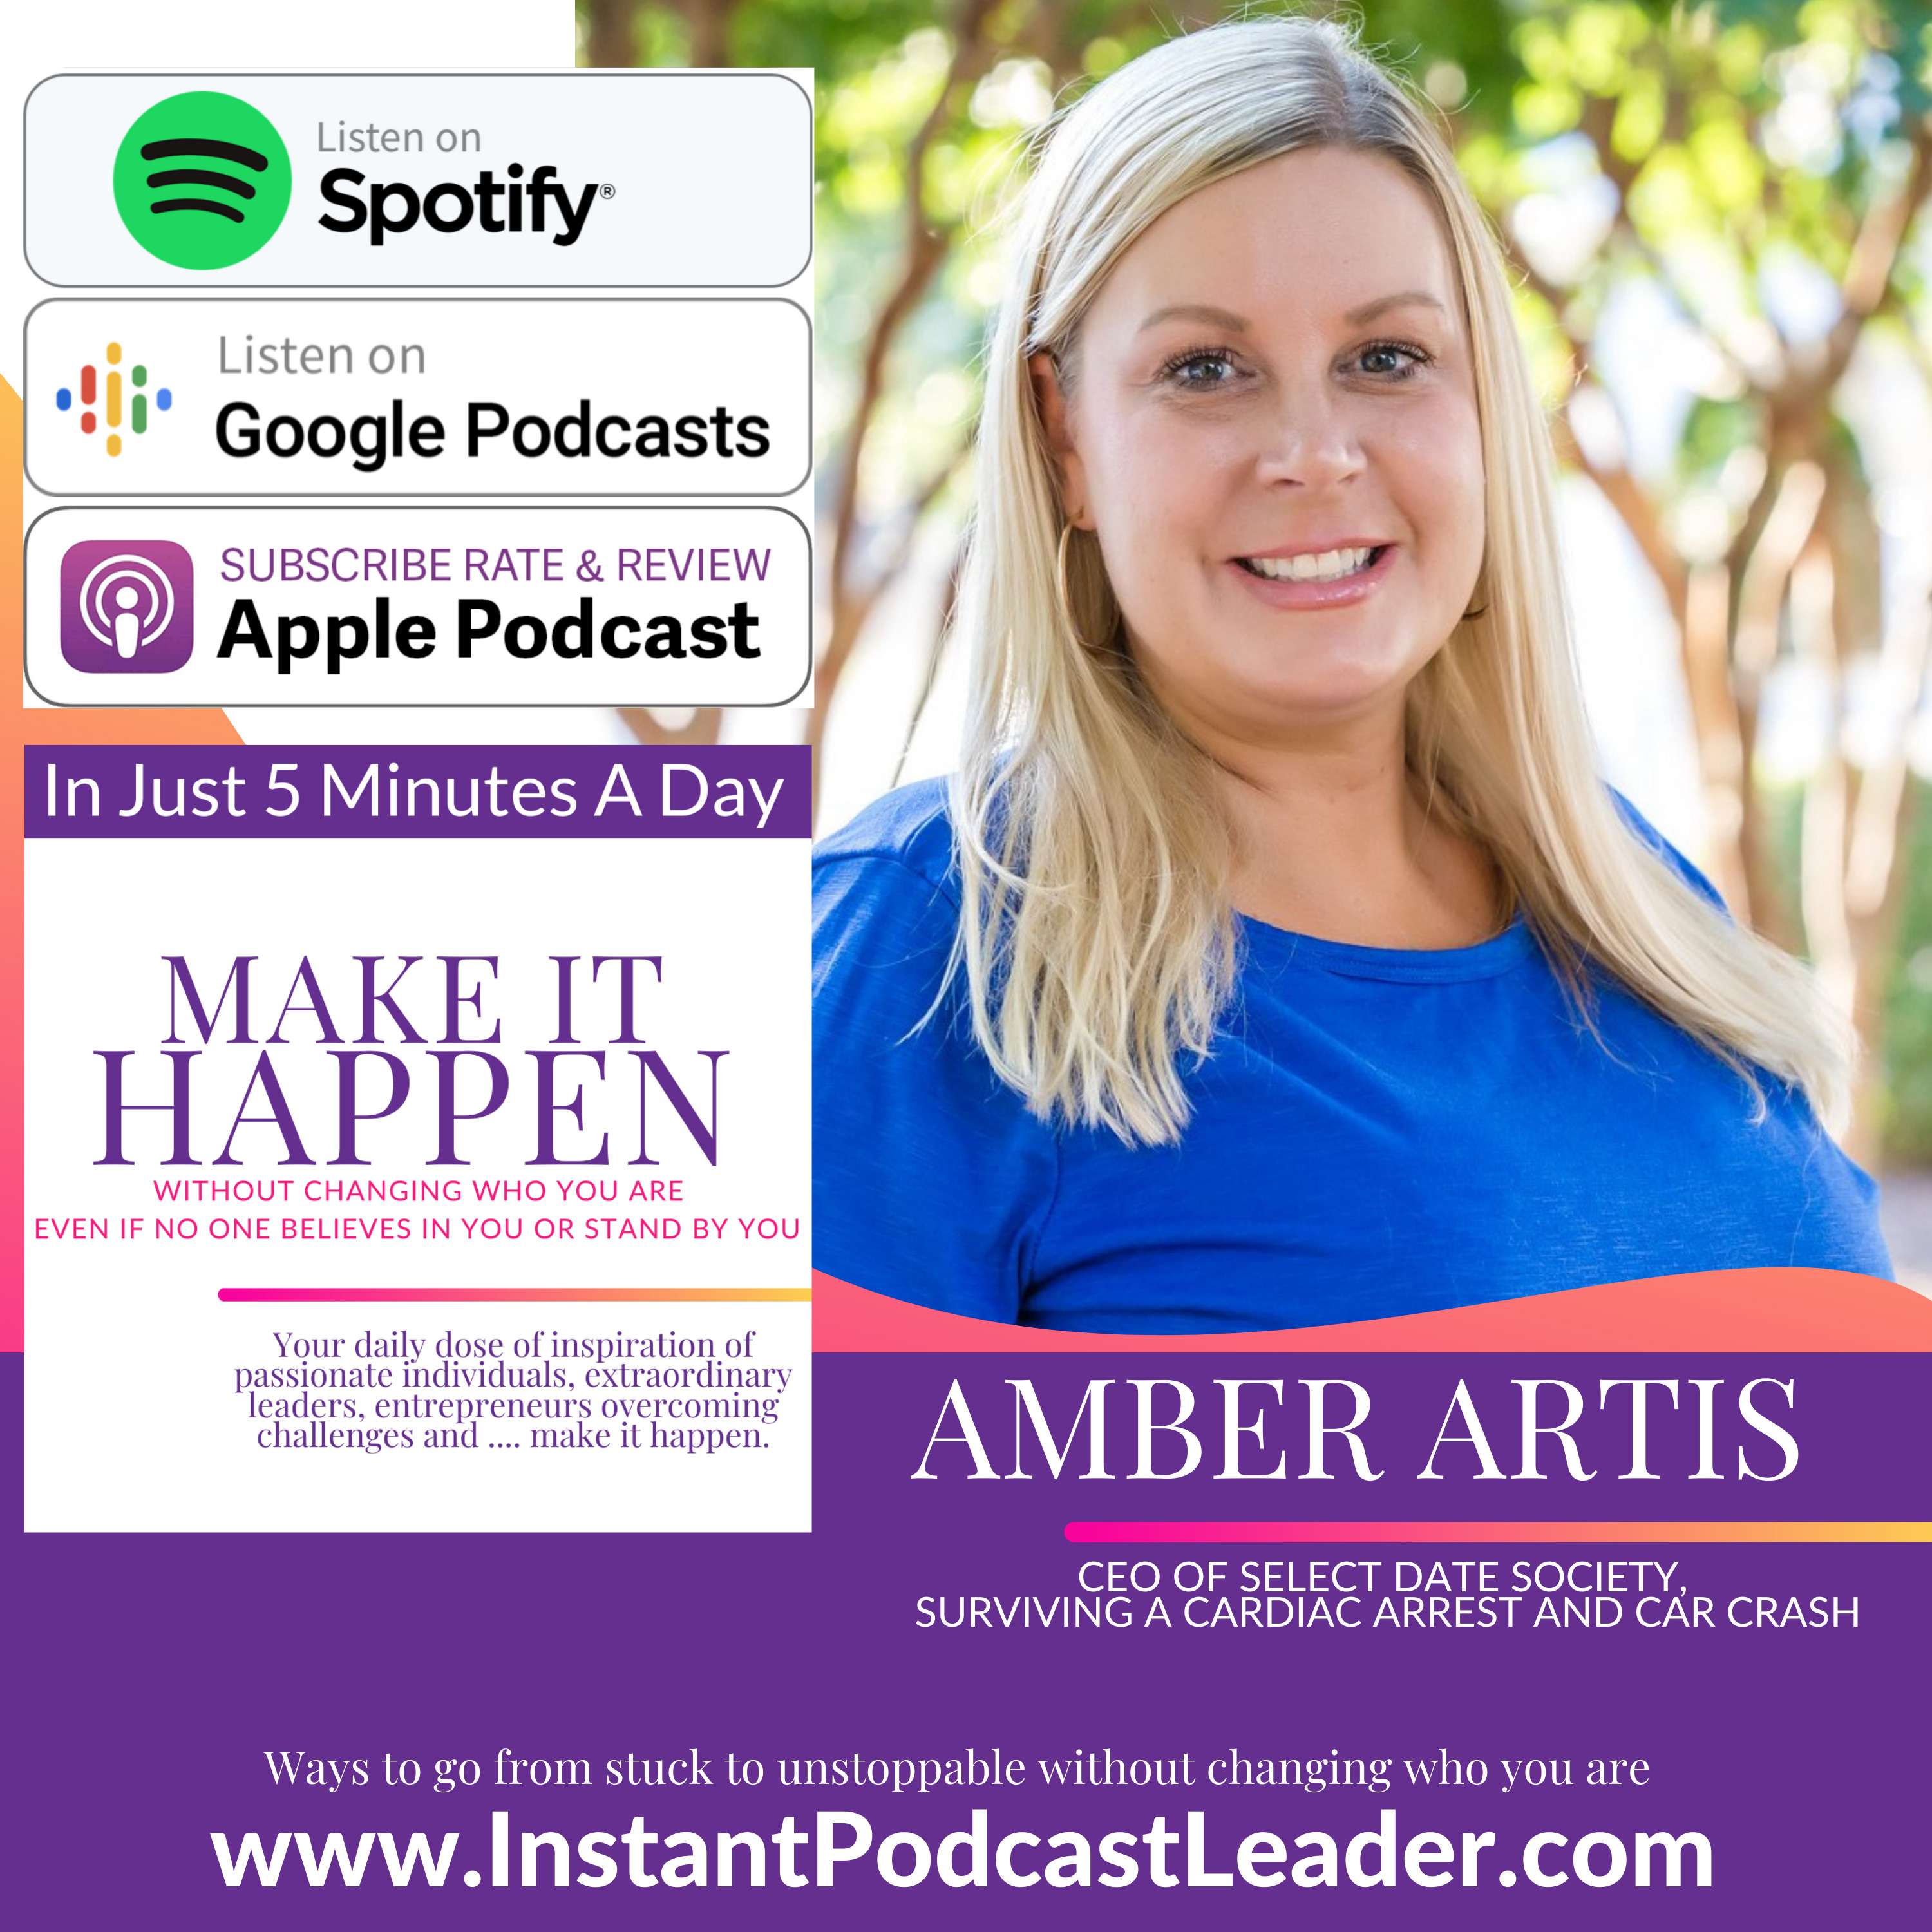 MIH EP48 Amber Artis CEO of Select Date Society surviving a cardiac arrest and car crash